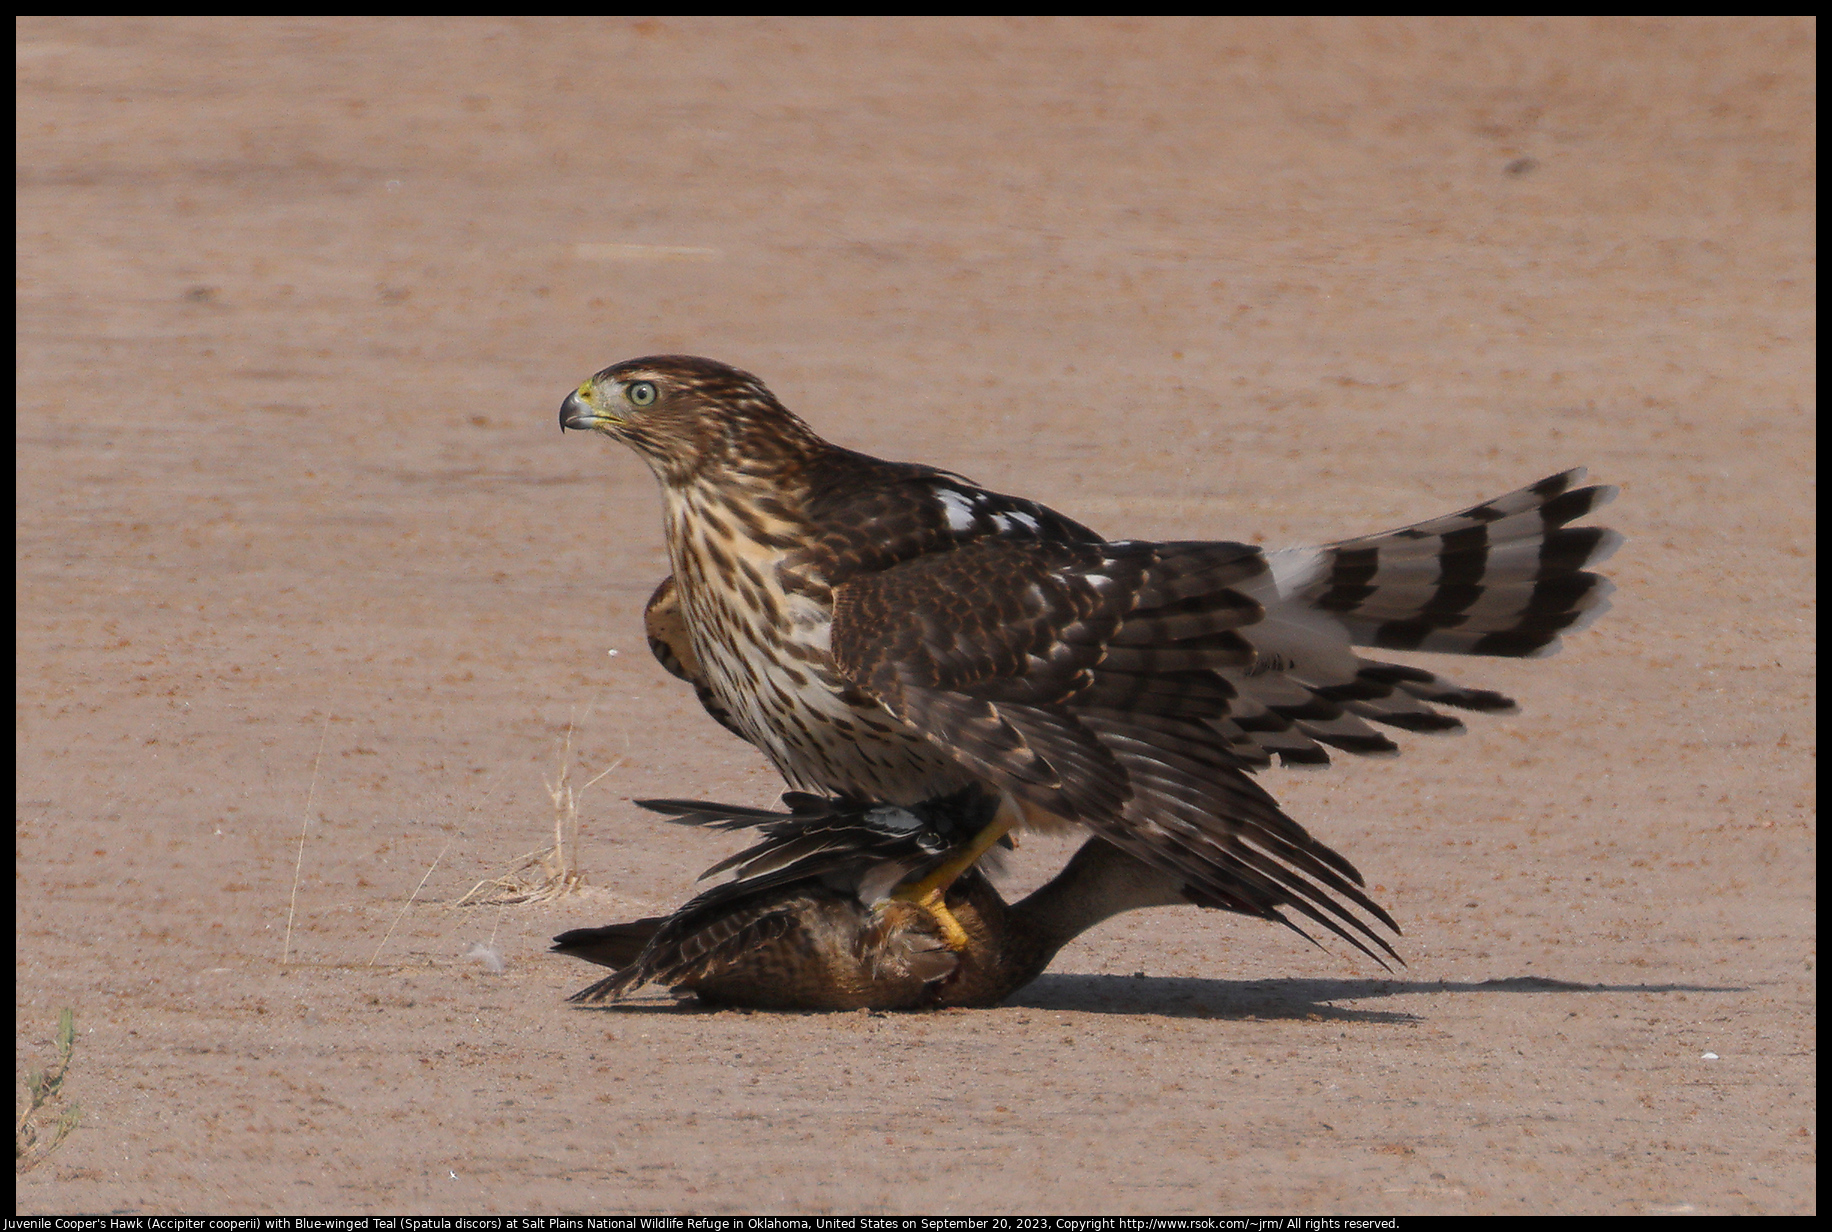 Juvenile Cooper's Hawk (Accipiter cooperii) with Blue-winged Teal (Spatula discors) at Salt Plains National Wildlife Refuge in Oklahoma, United States on September 20, 2023